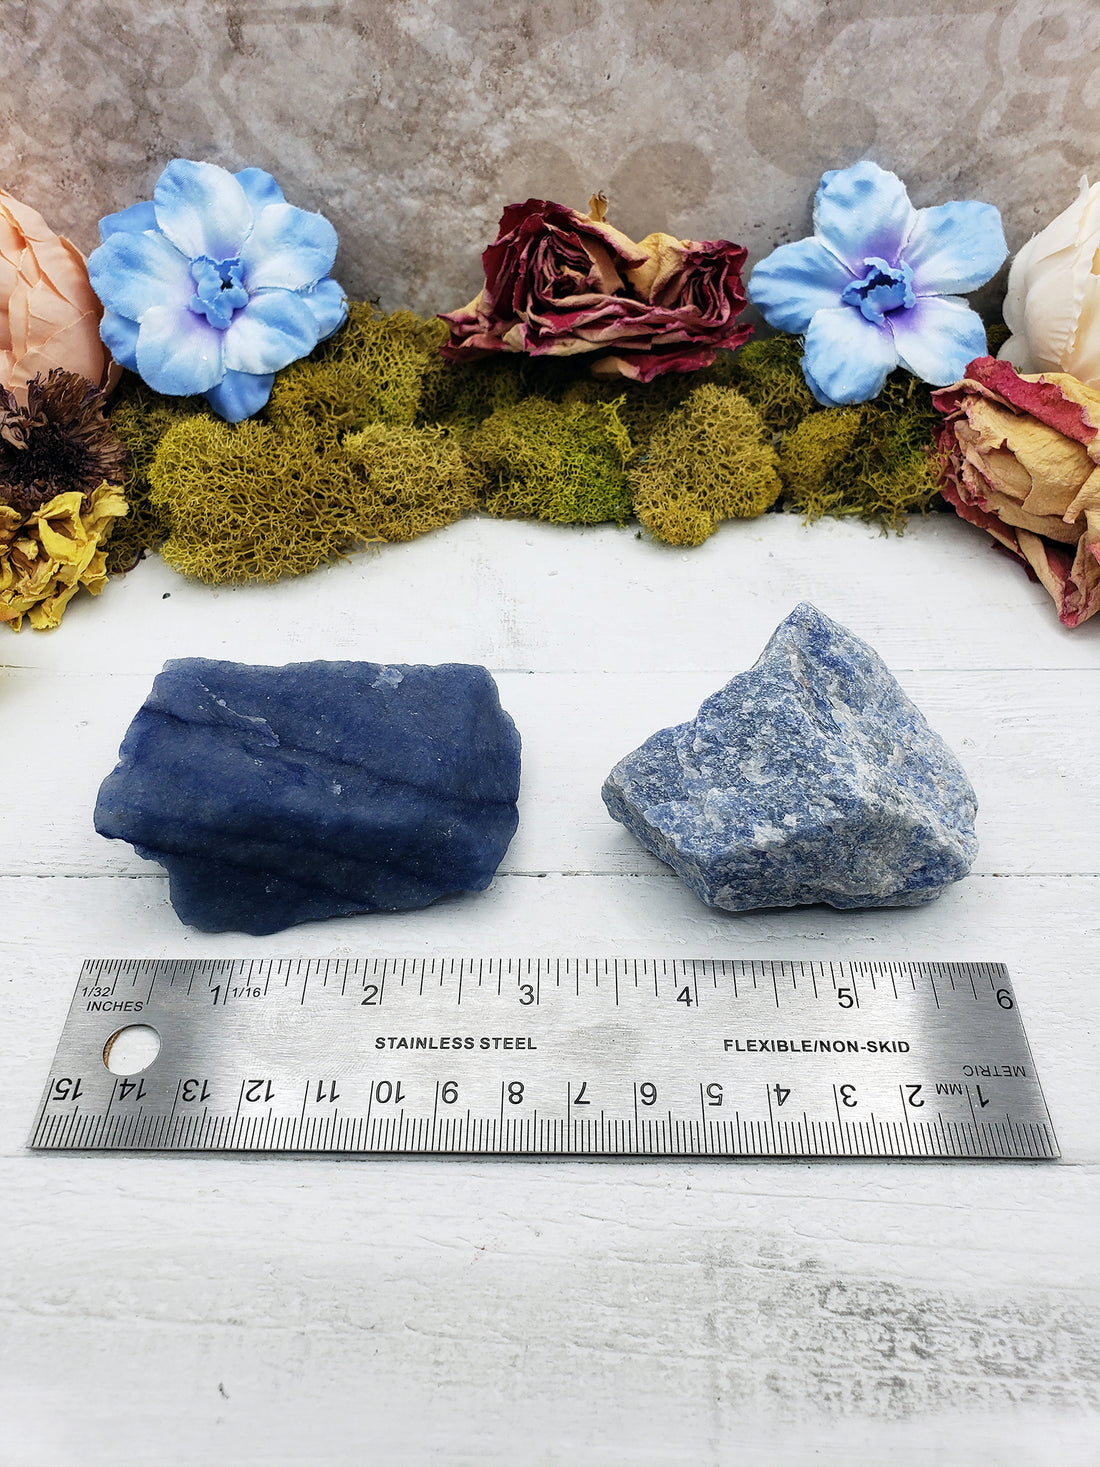 Ruler comparing two rough blue quartz crystal stones, one is deep blue and the other is light blue